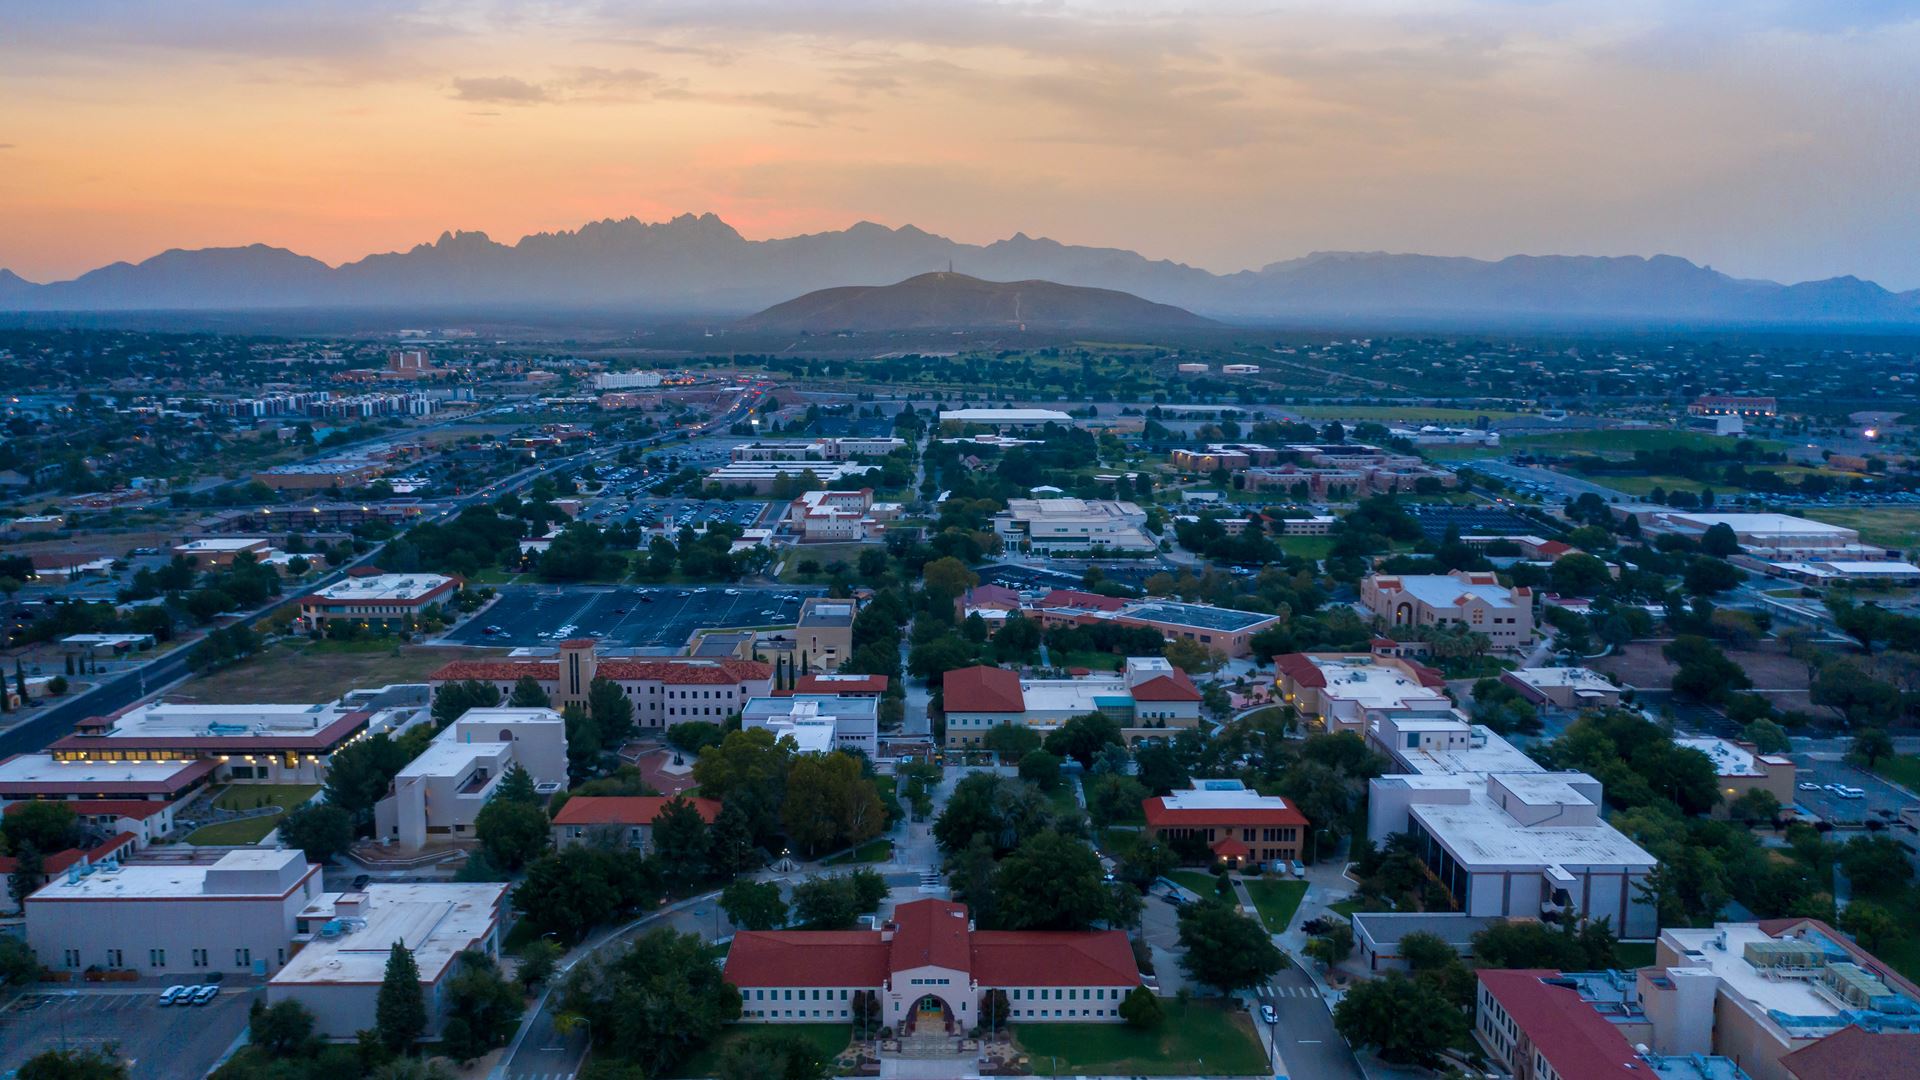 NBCU Academy collaboration will support journalism, engineering at NMSU